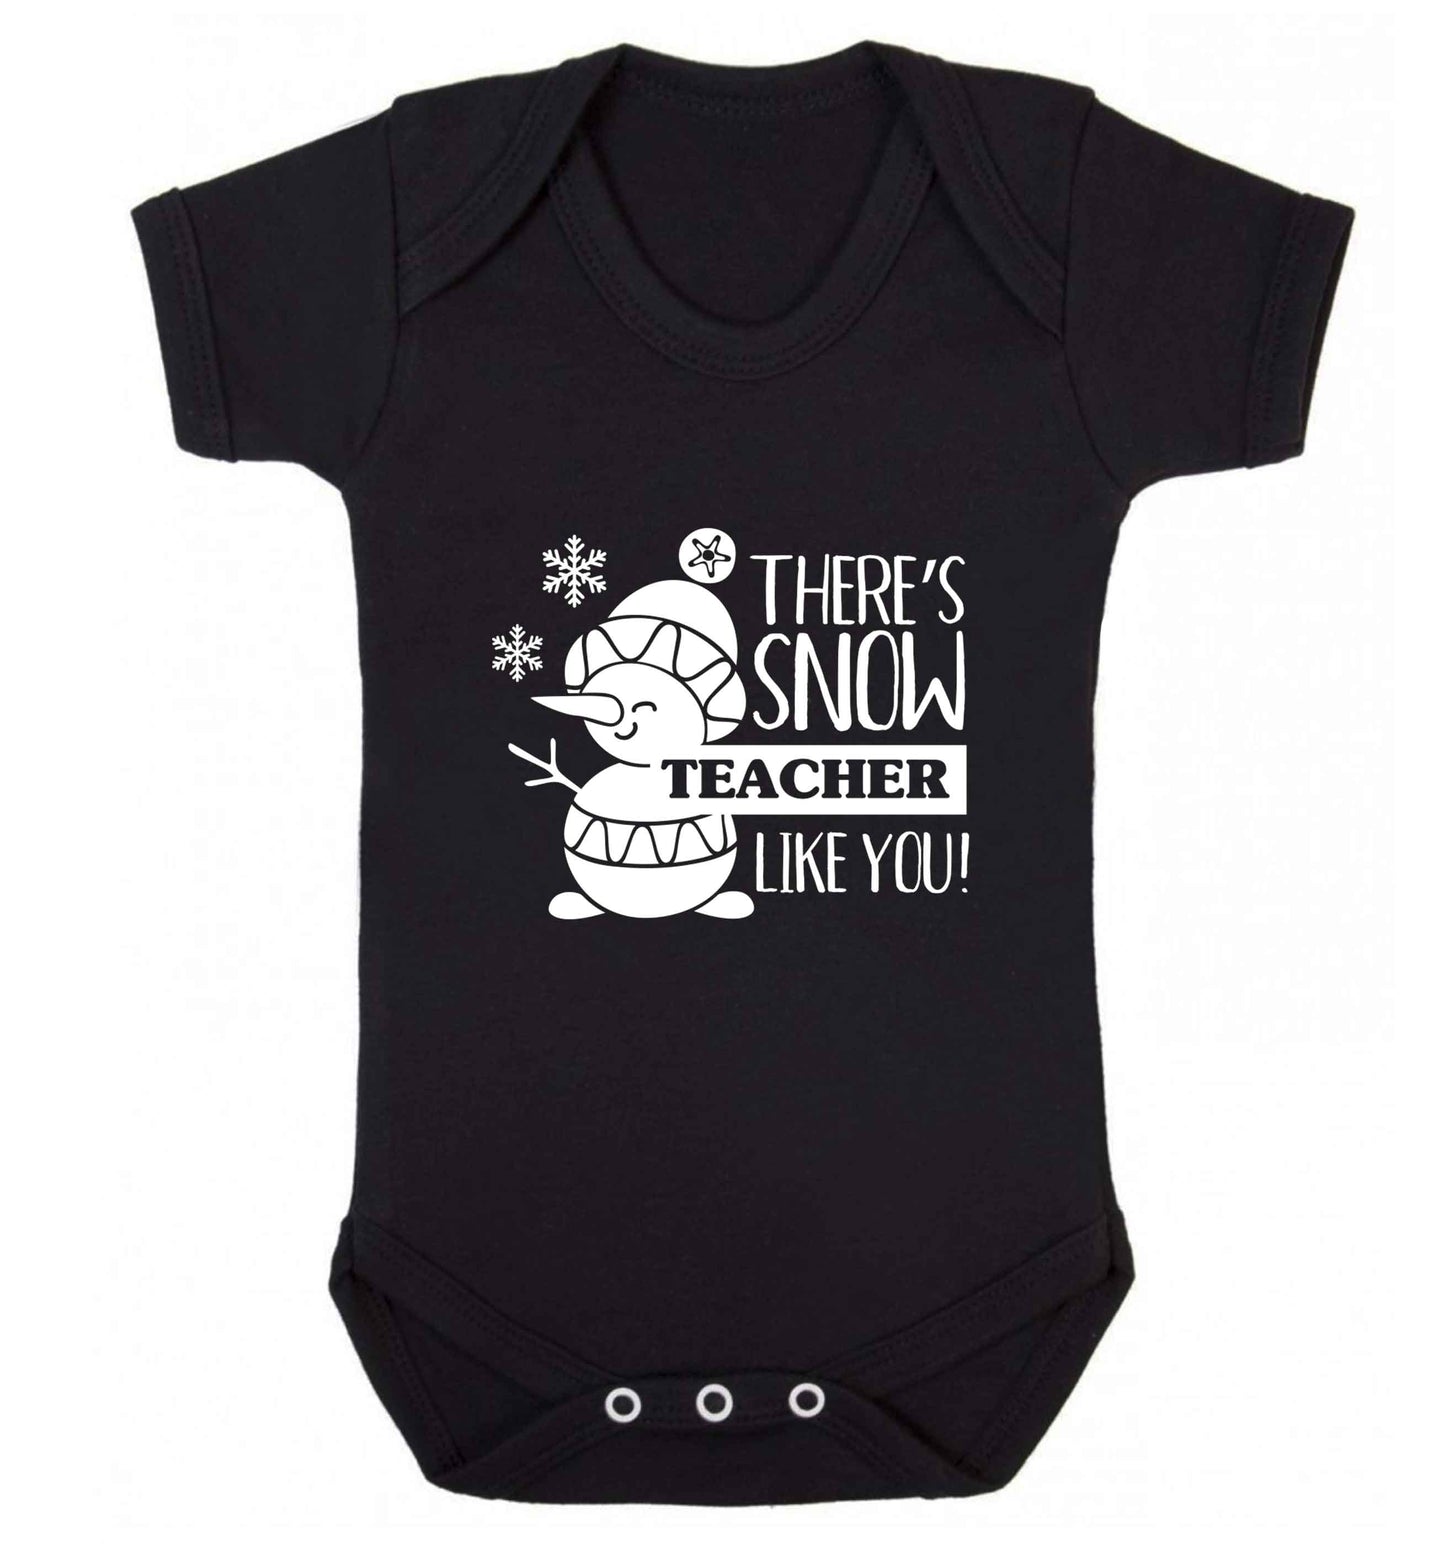 There's snow teacher like you baby vest black 18-24 months